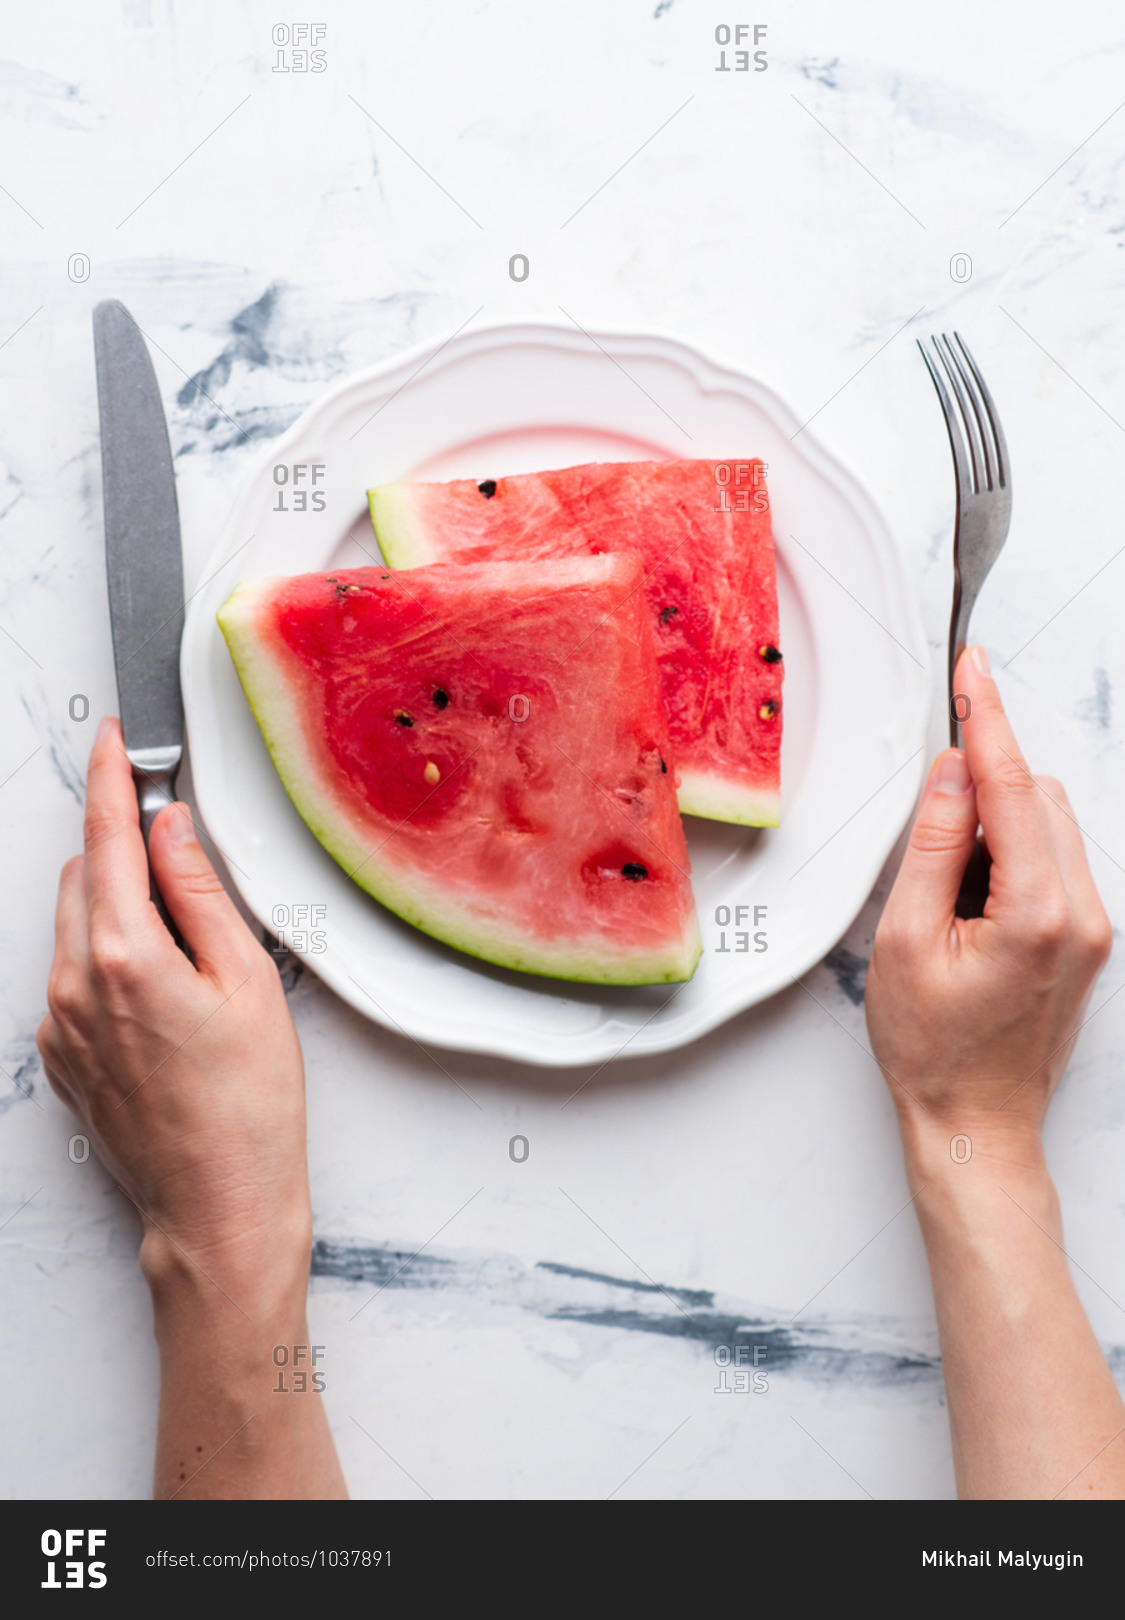 Sliced watermelon served on ceramic white plate over white background. Female hands holding fork and knife